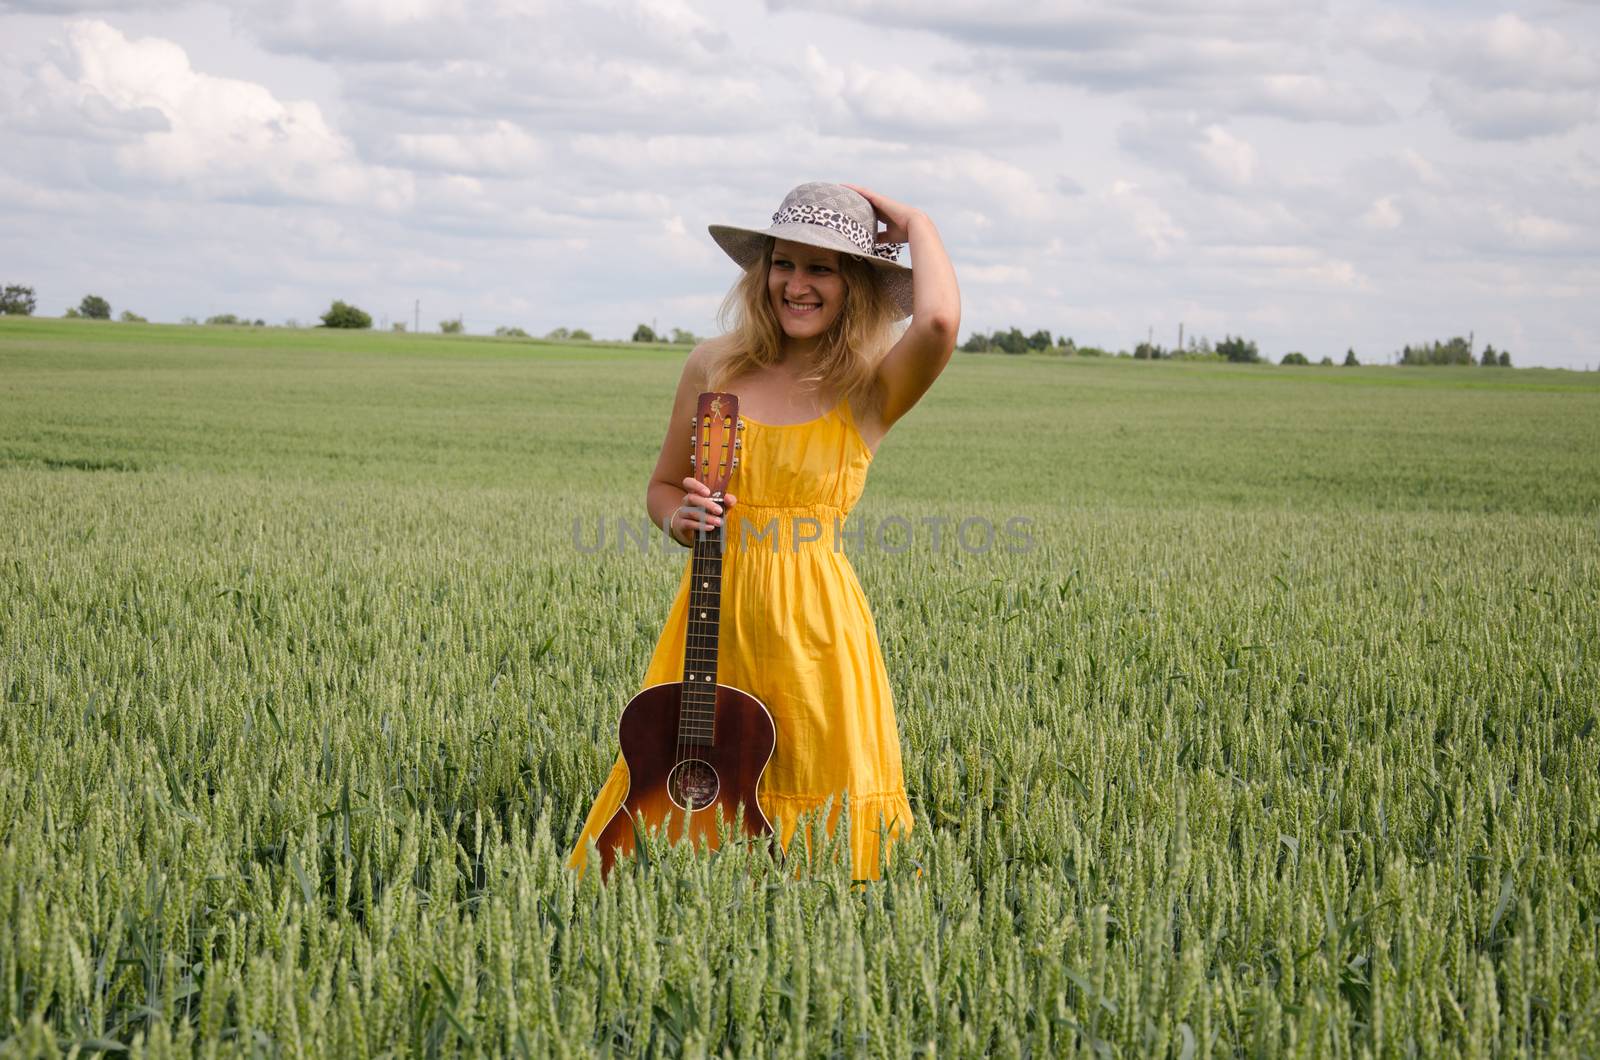 women yellow dress and guitar pose in rye field by sauletas